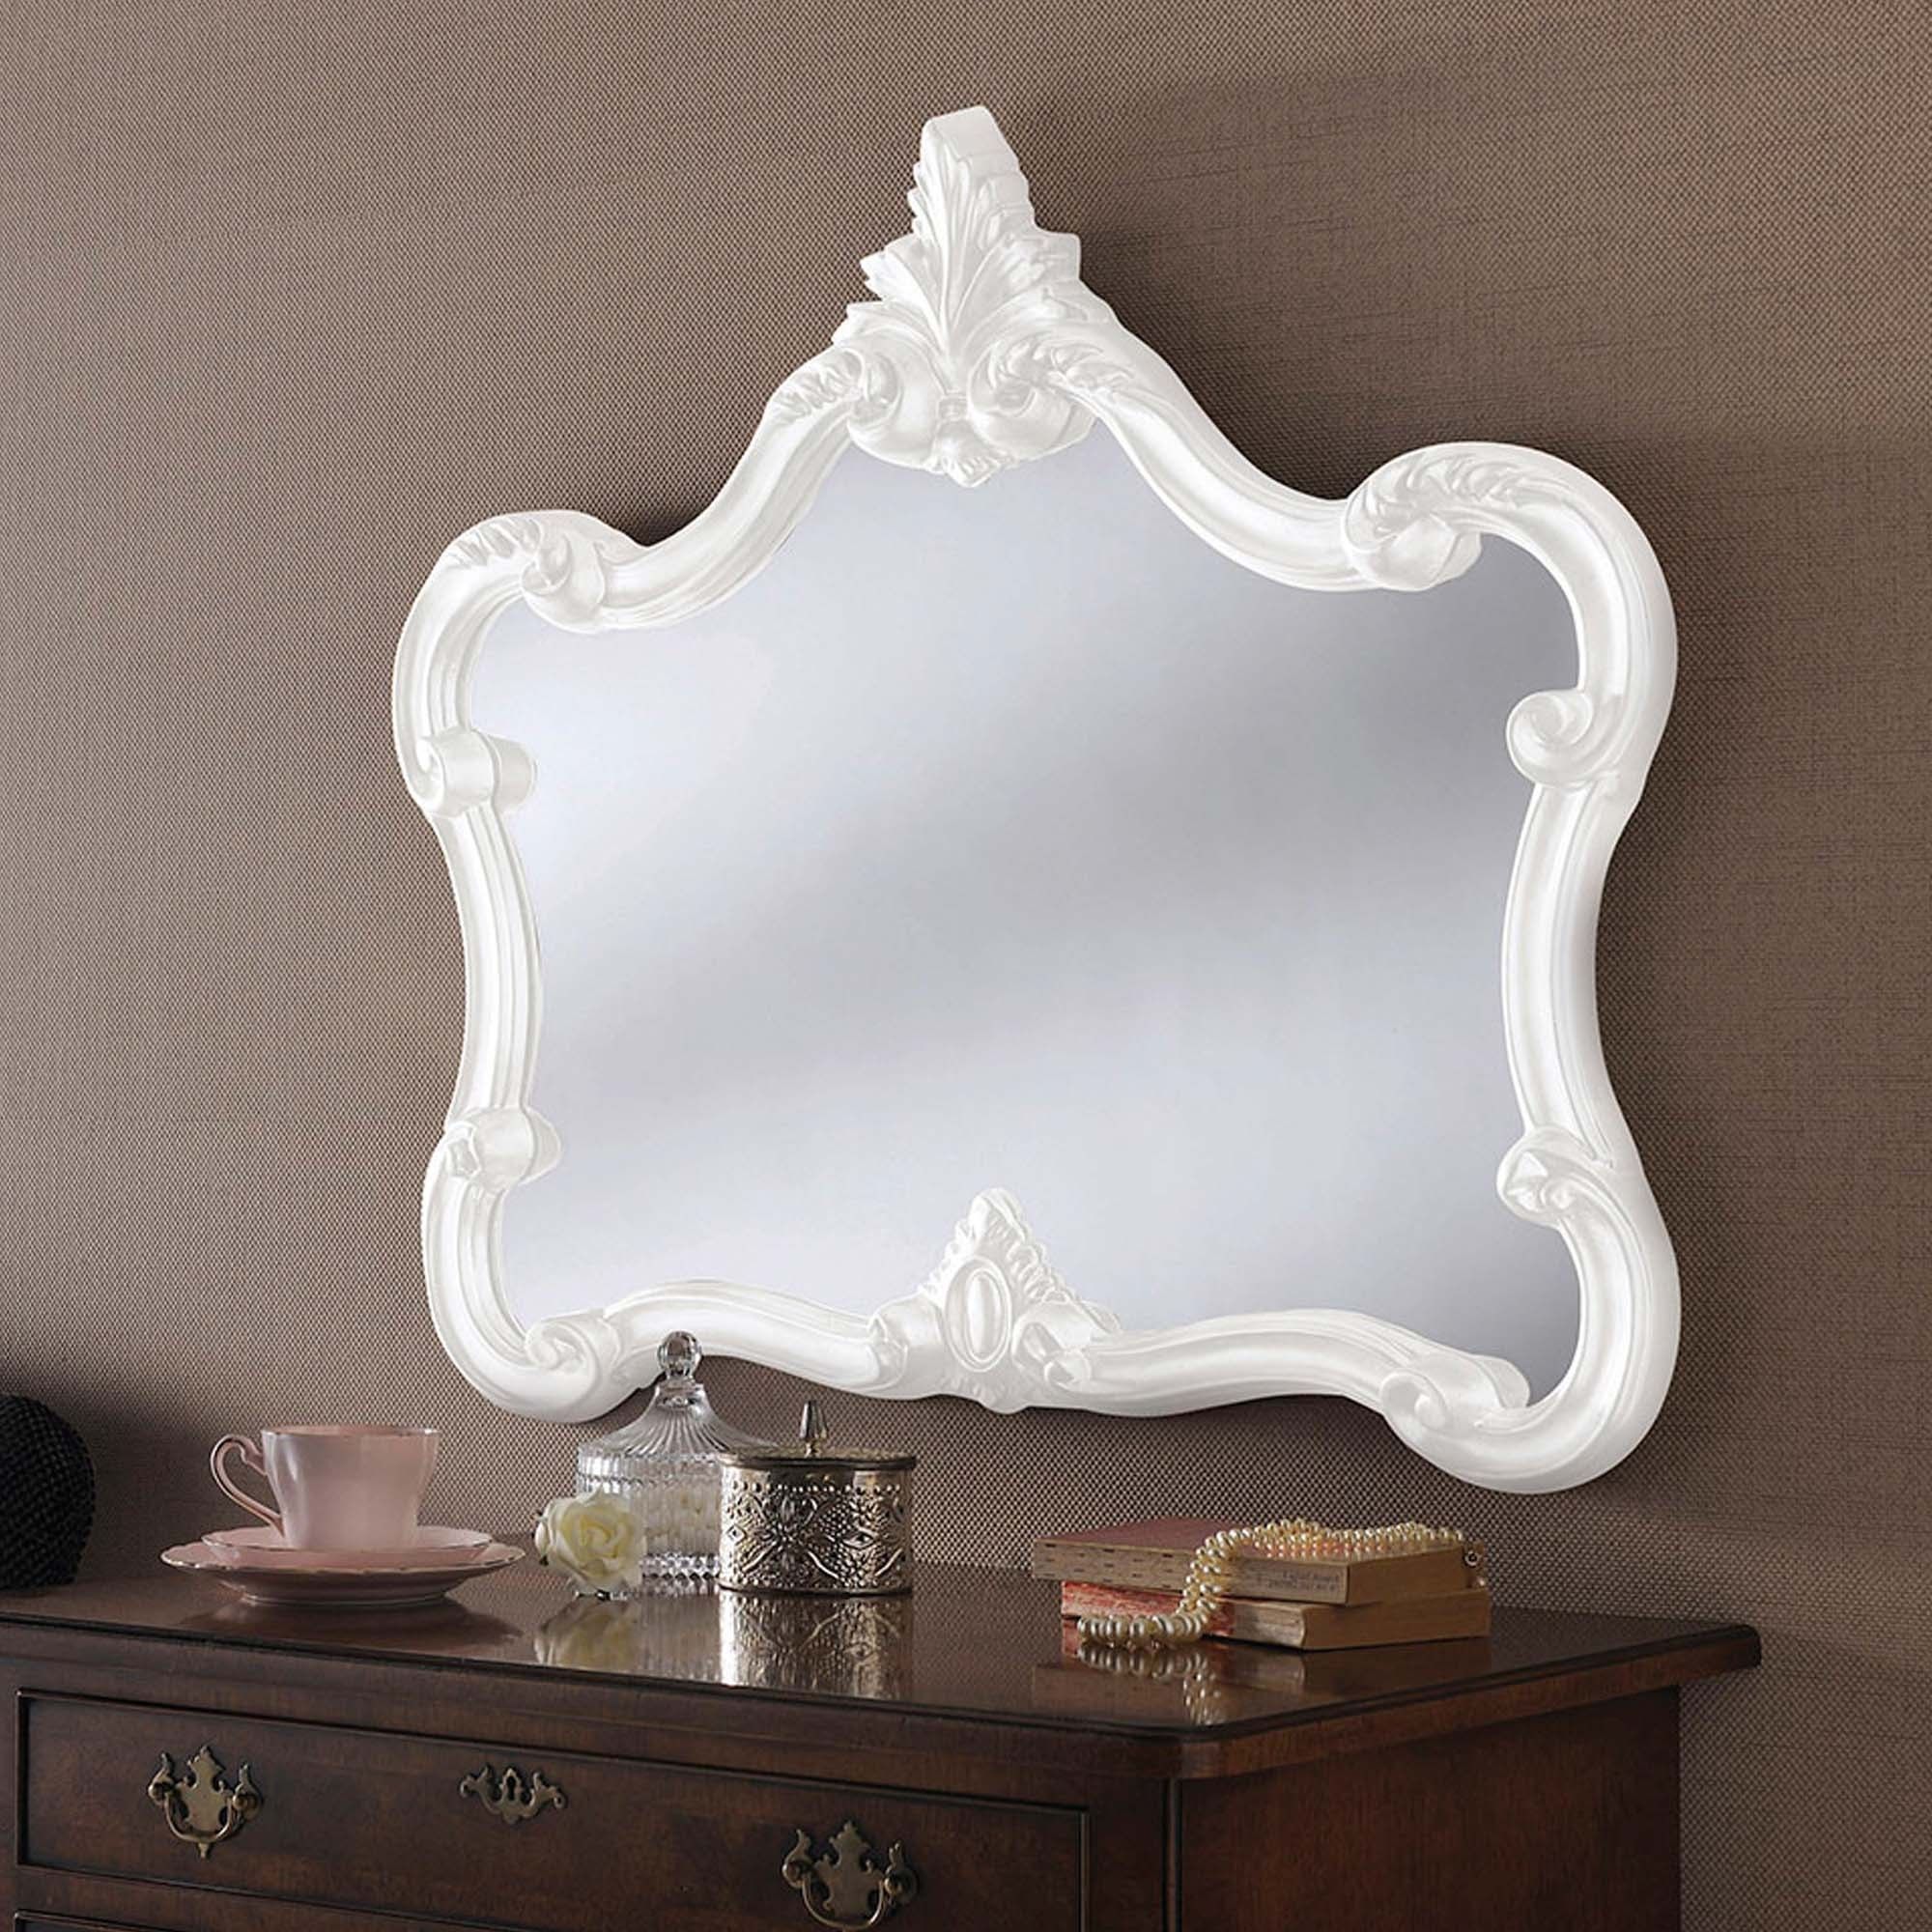 2020 Antiqued Glass Wall Mirrors With Antique French Style White Ornate Wall Mirror (View 6 of 15)